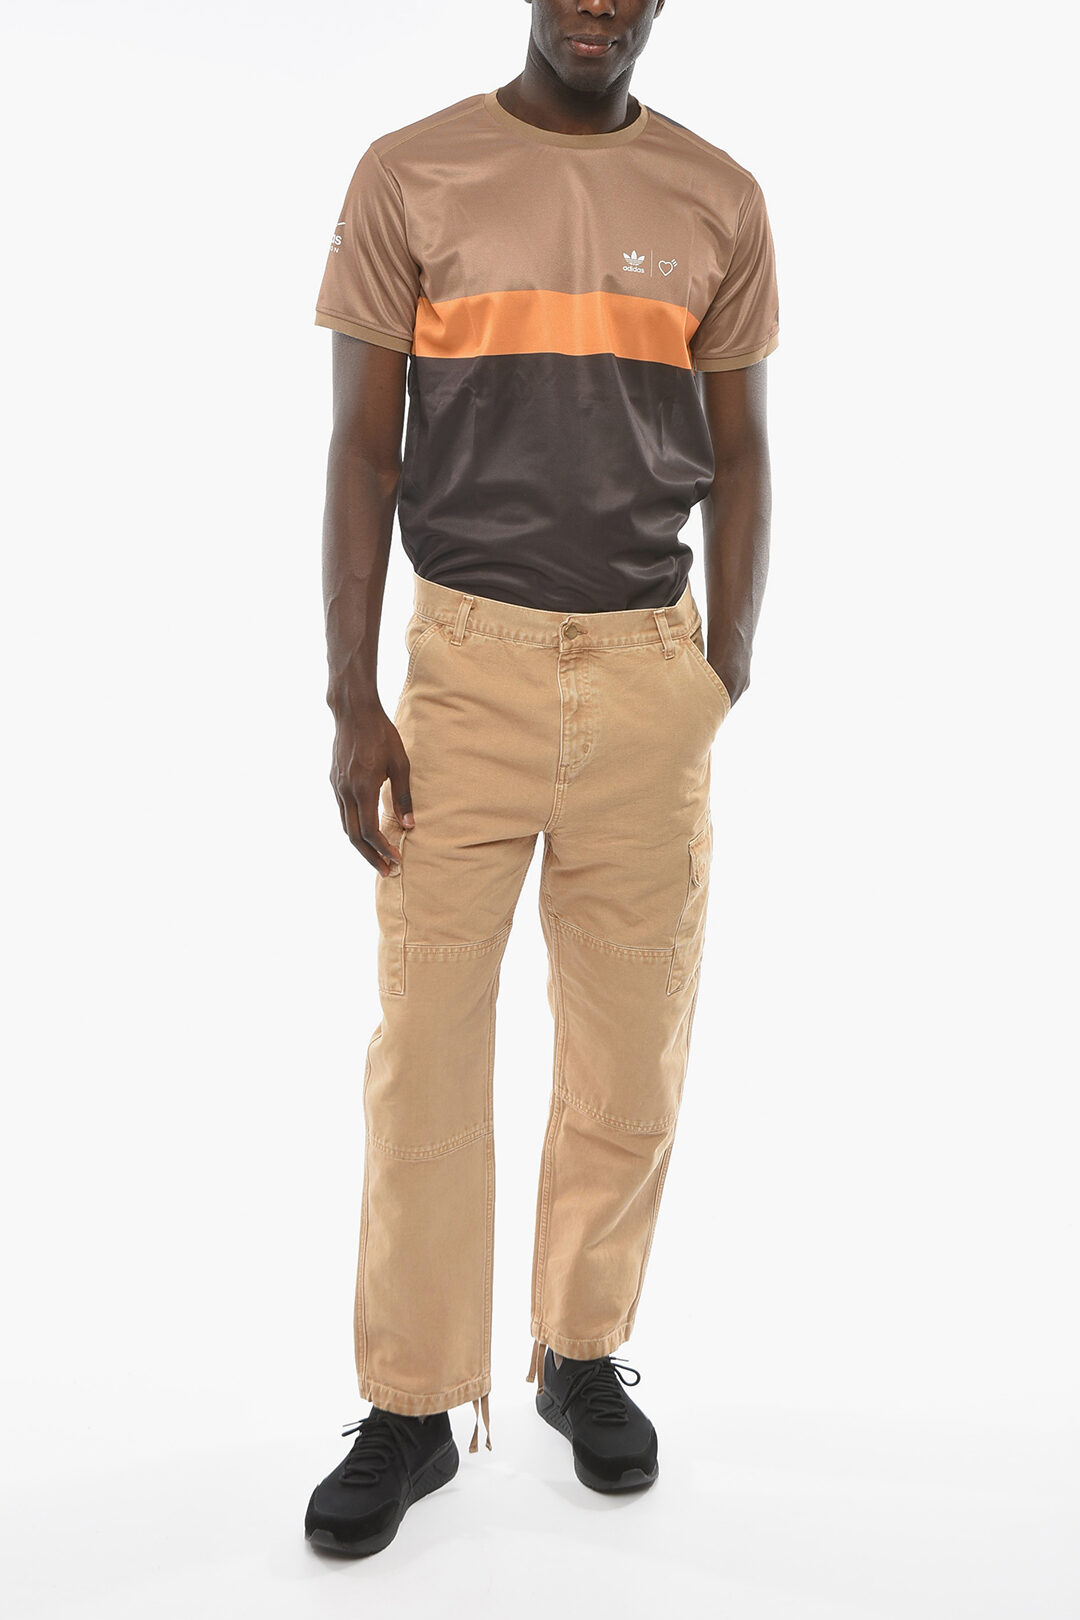 Consider the colour of your cargo pants balance is key  wwwstylestaplescomau  Fashion Popular clothing styles Clothes